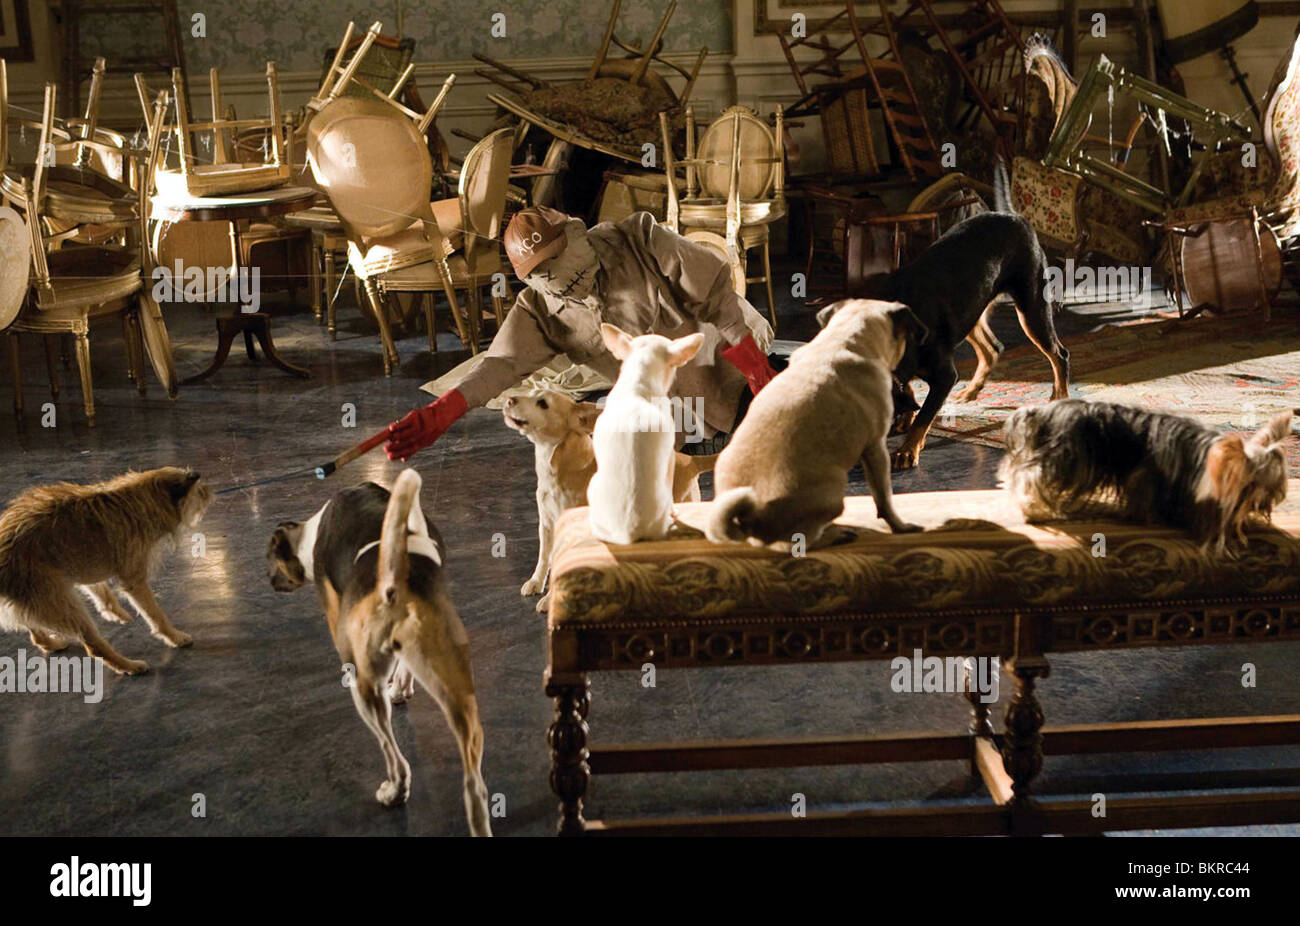 HOTEL FOR DOGS (2009) Thor Freudenthal (DIR) 005 Banque D'Images